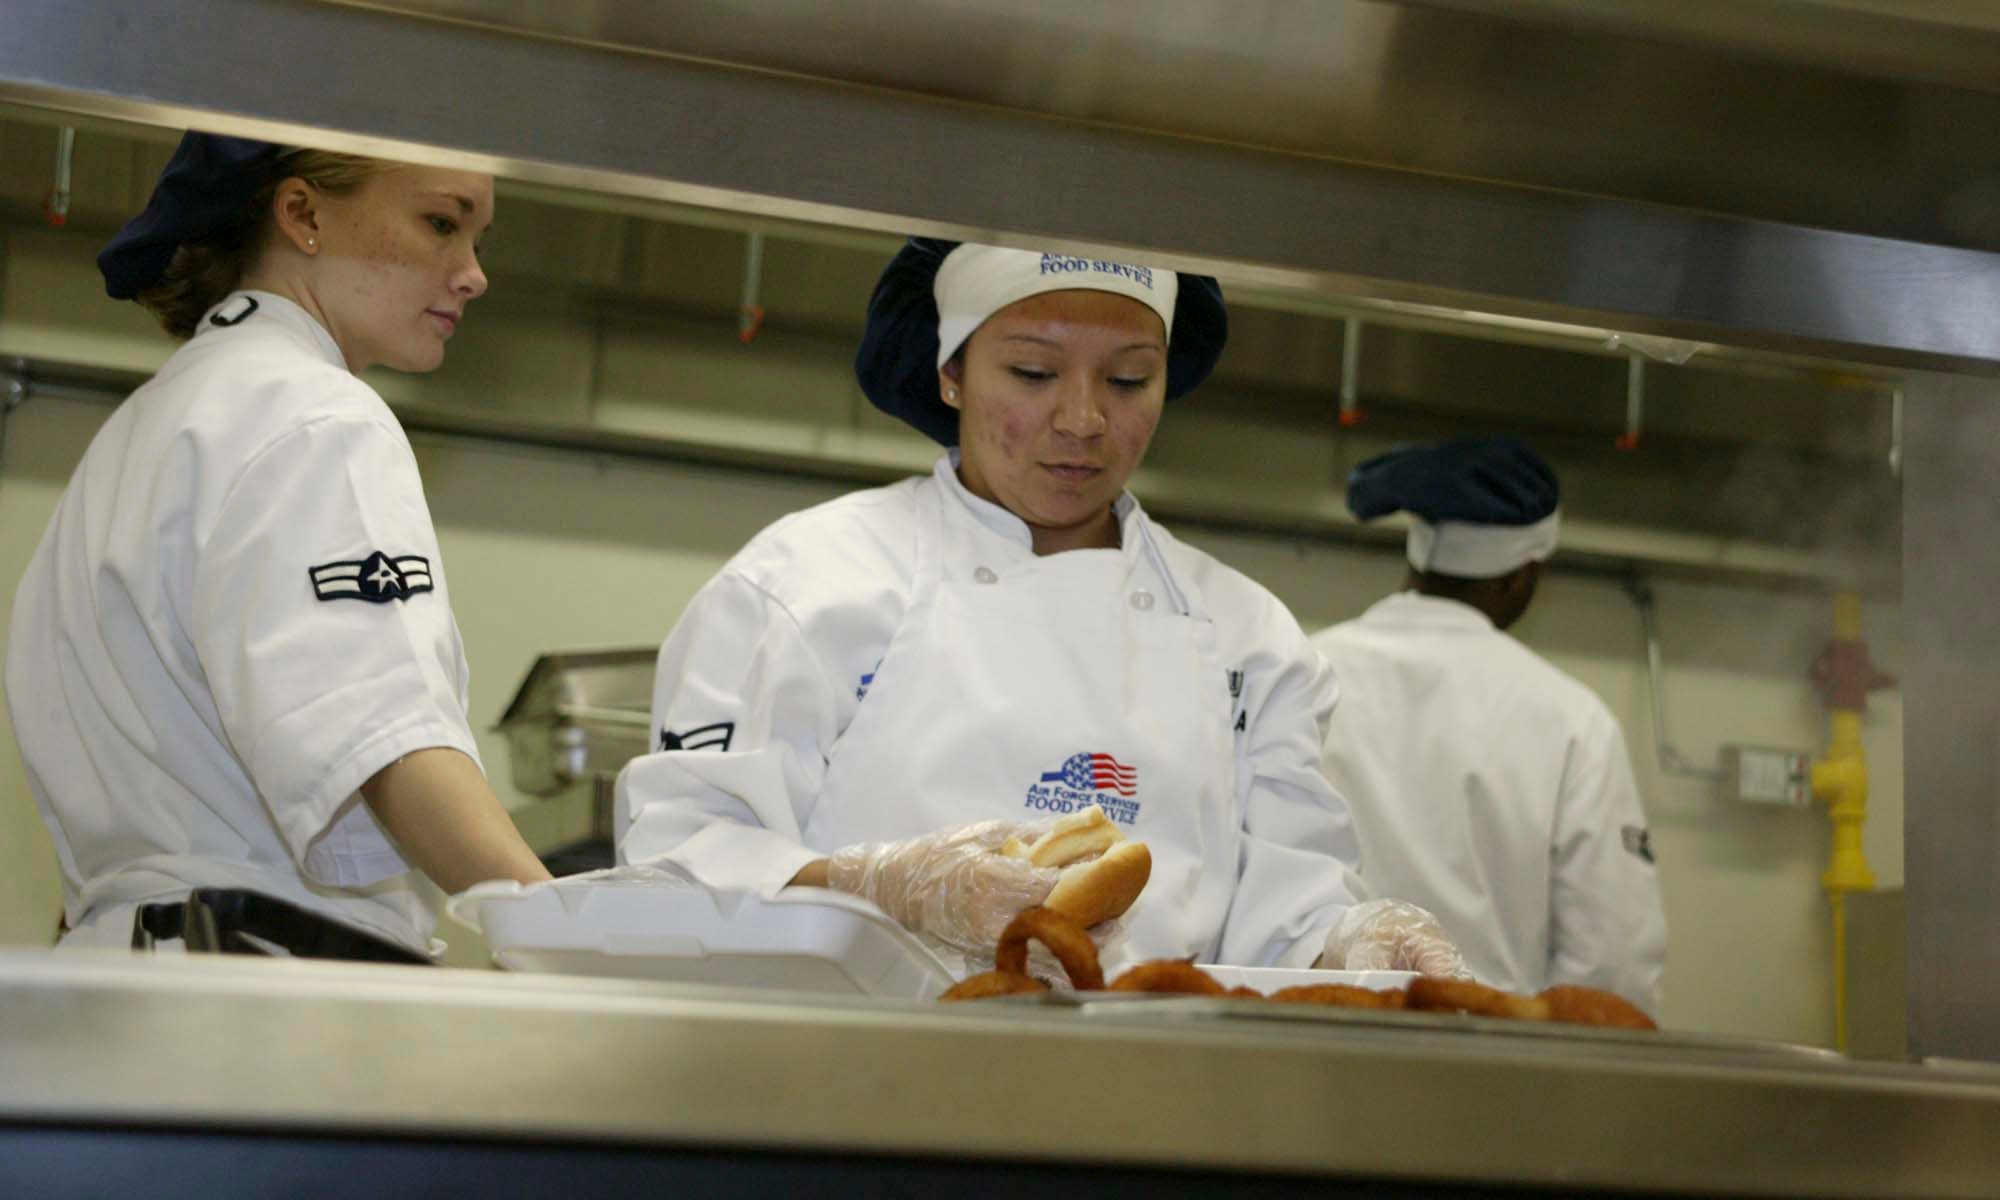 SHAW AIR FORCE BASE, S.C. -- Airmen 1st Class Heather Krump (left) and Edna Padilla, 20th Services Squadron food service specialists, prepare lunch May 1 in the new flight kitchen in the Chandler Deployment Processing Center. The flight kitchen is open 11 a.m. to 1 p.m. and 4:30 to 7 p.m. Monday through Friday.  It will not be open during the Phase II exercise in May. (U.S. Air Force photo/ Senior Airman Holly MacDonald)  